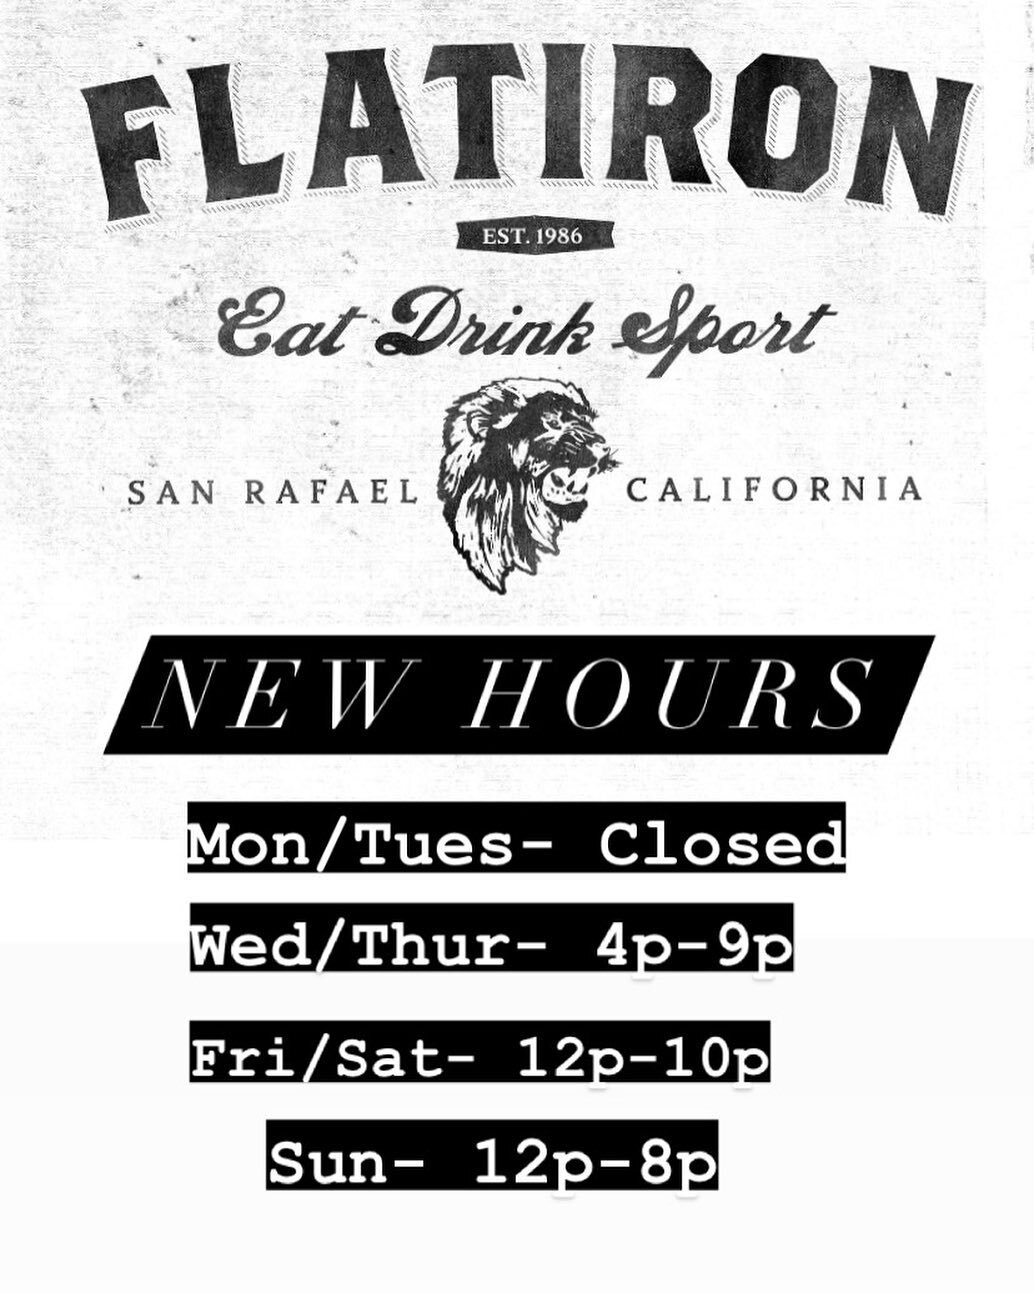 We are so happy to be back open for indoor dining! Please continue to check back with us as our hours may change! #indoordining #flatironsr #supportsmallbusiness #supportlocal @flatironsanrafael